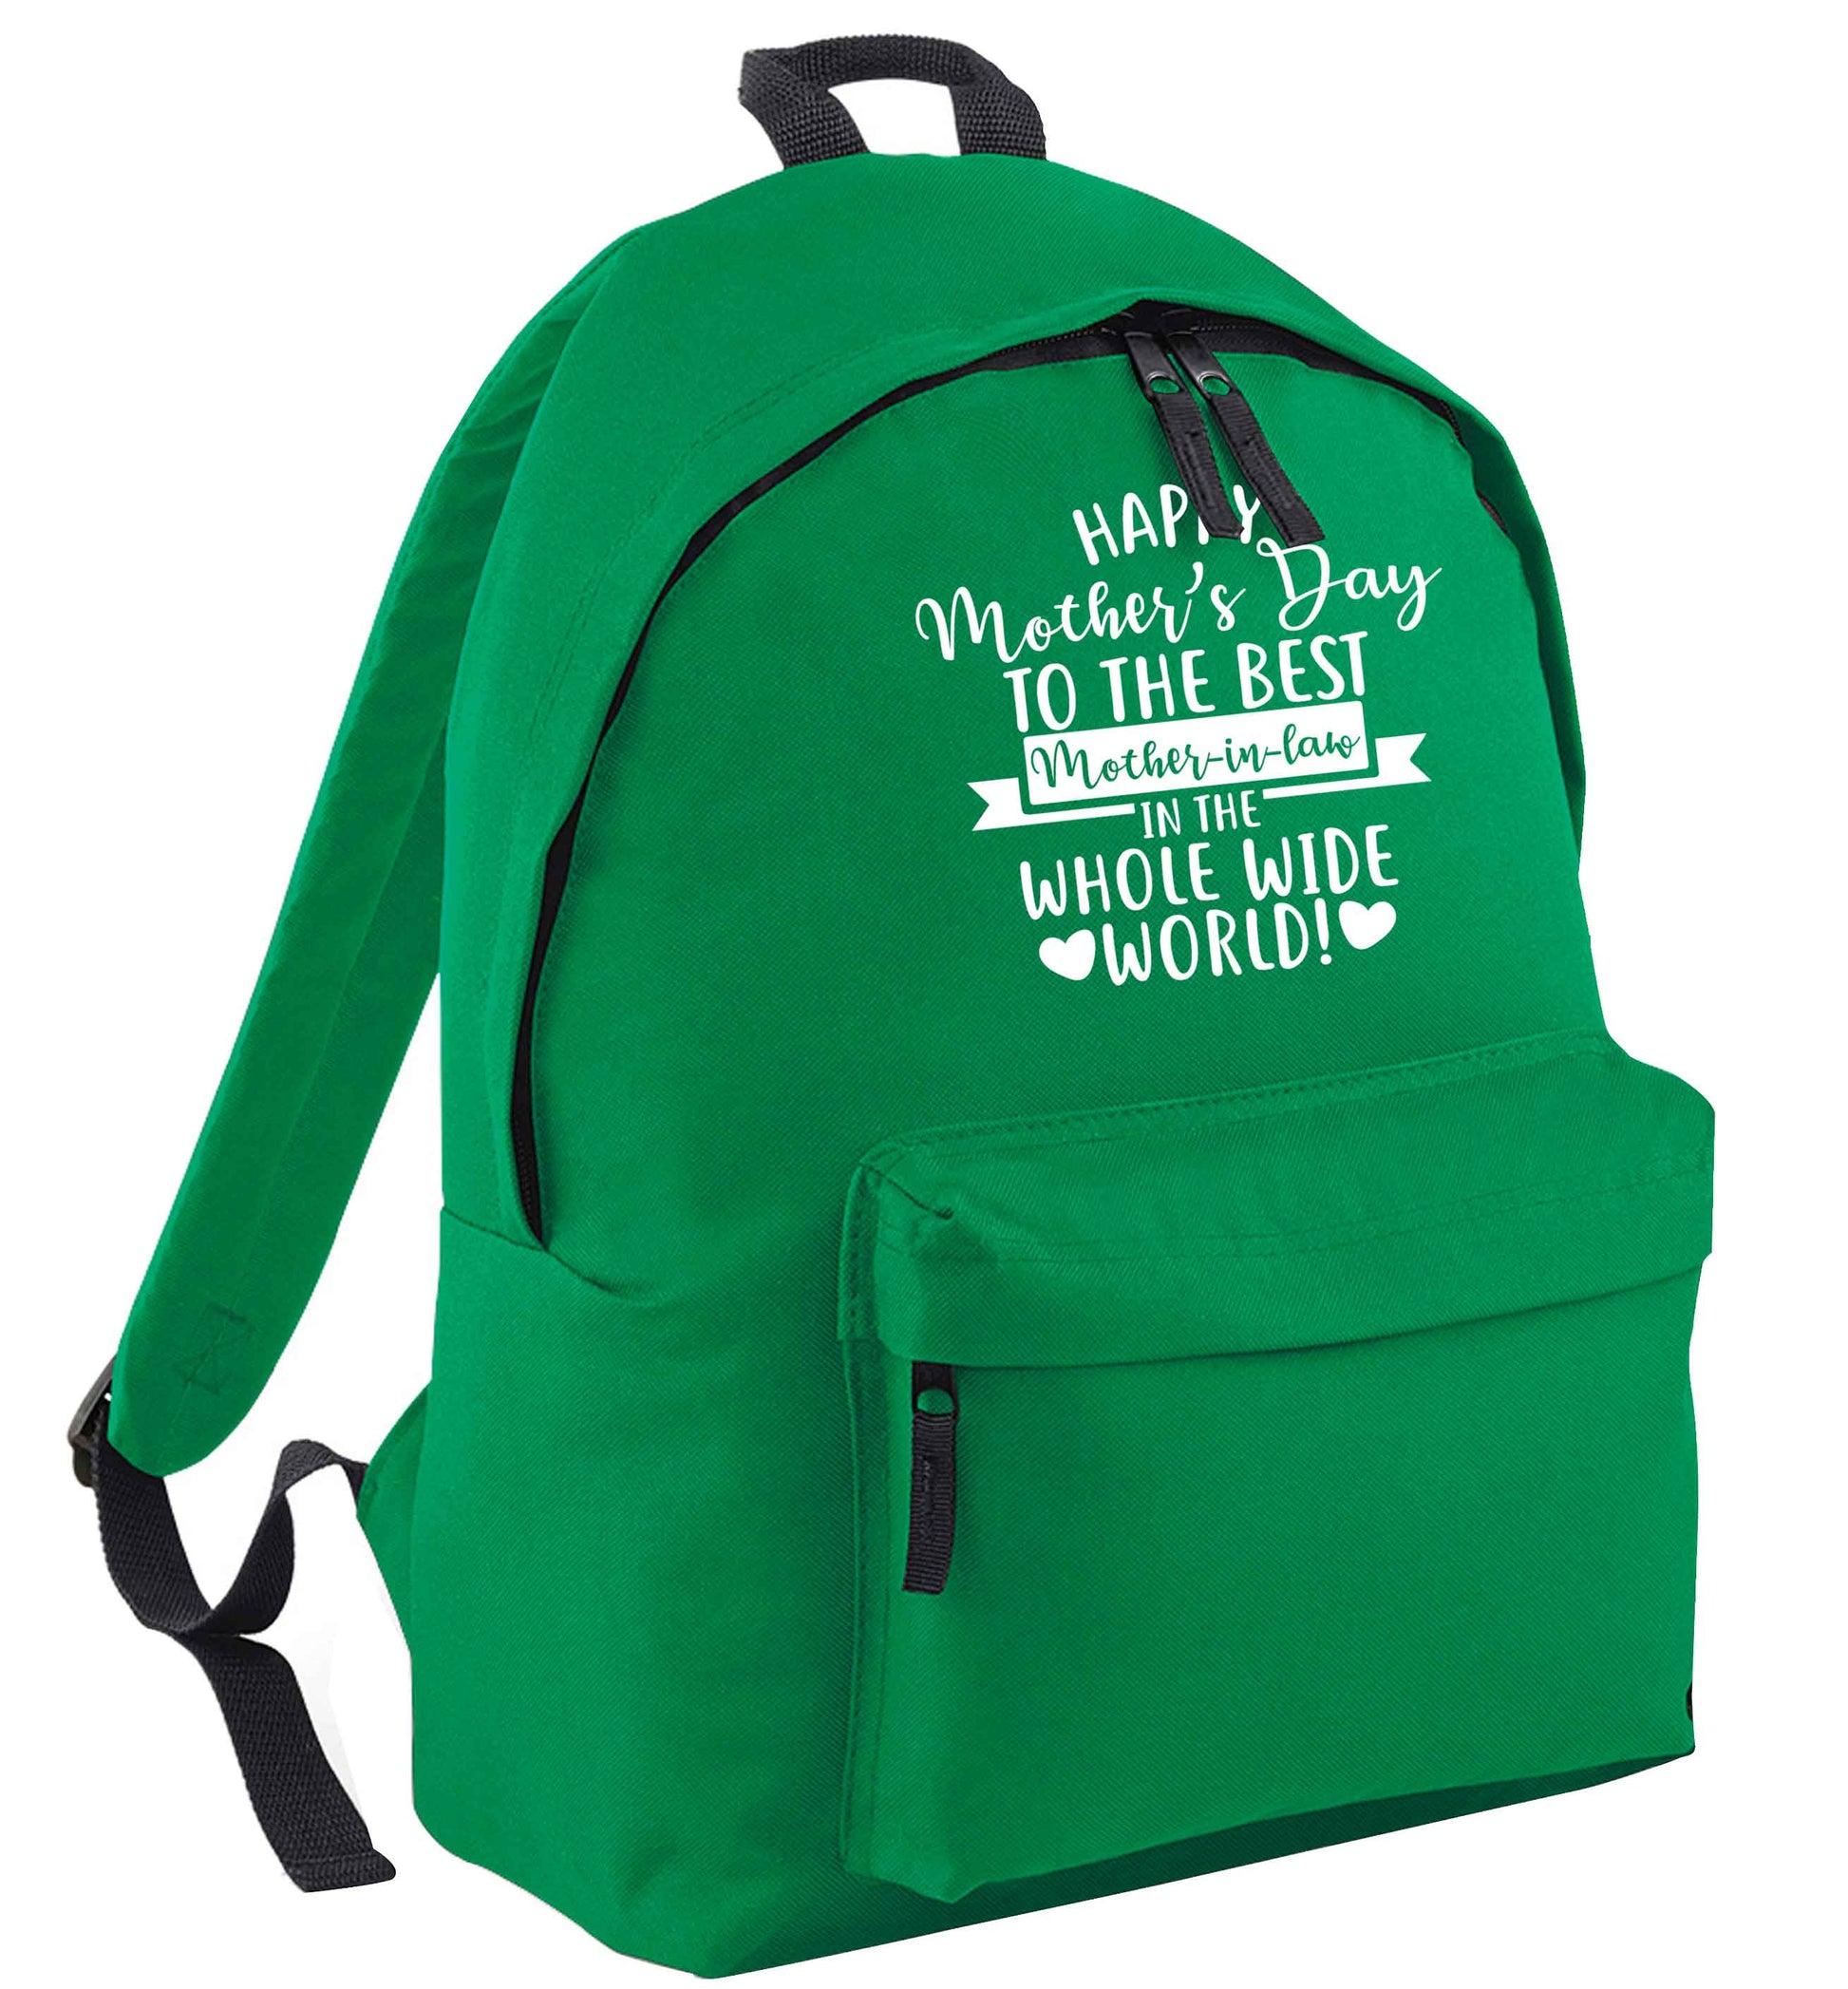 Happy mother's day to the best mother-in law in the world green adults backpack